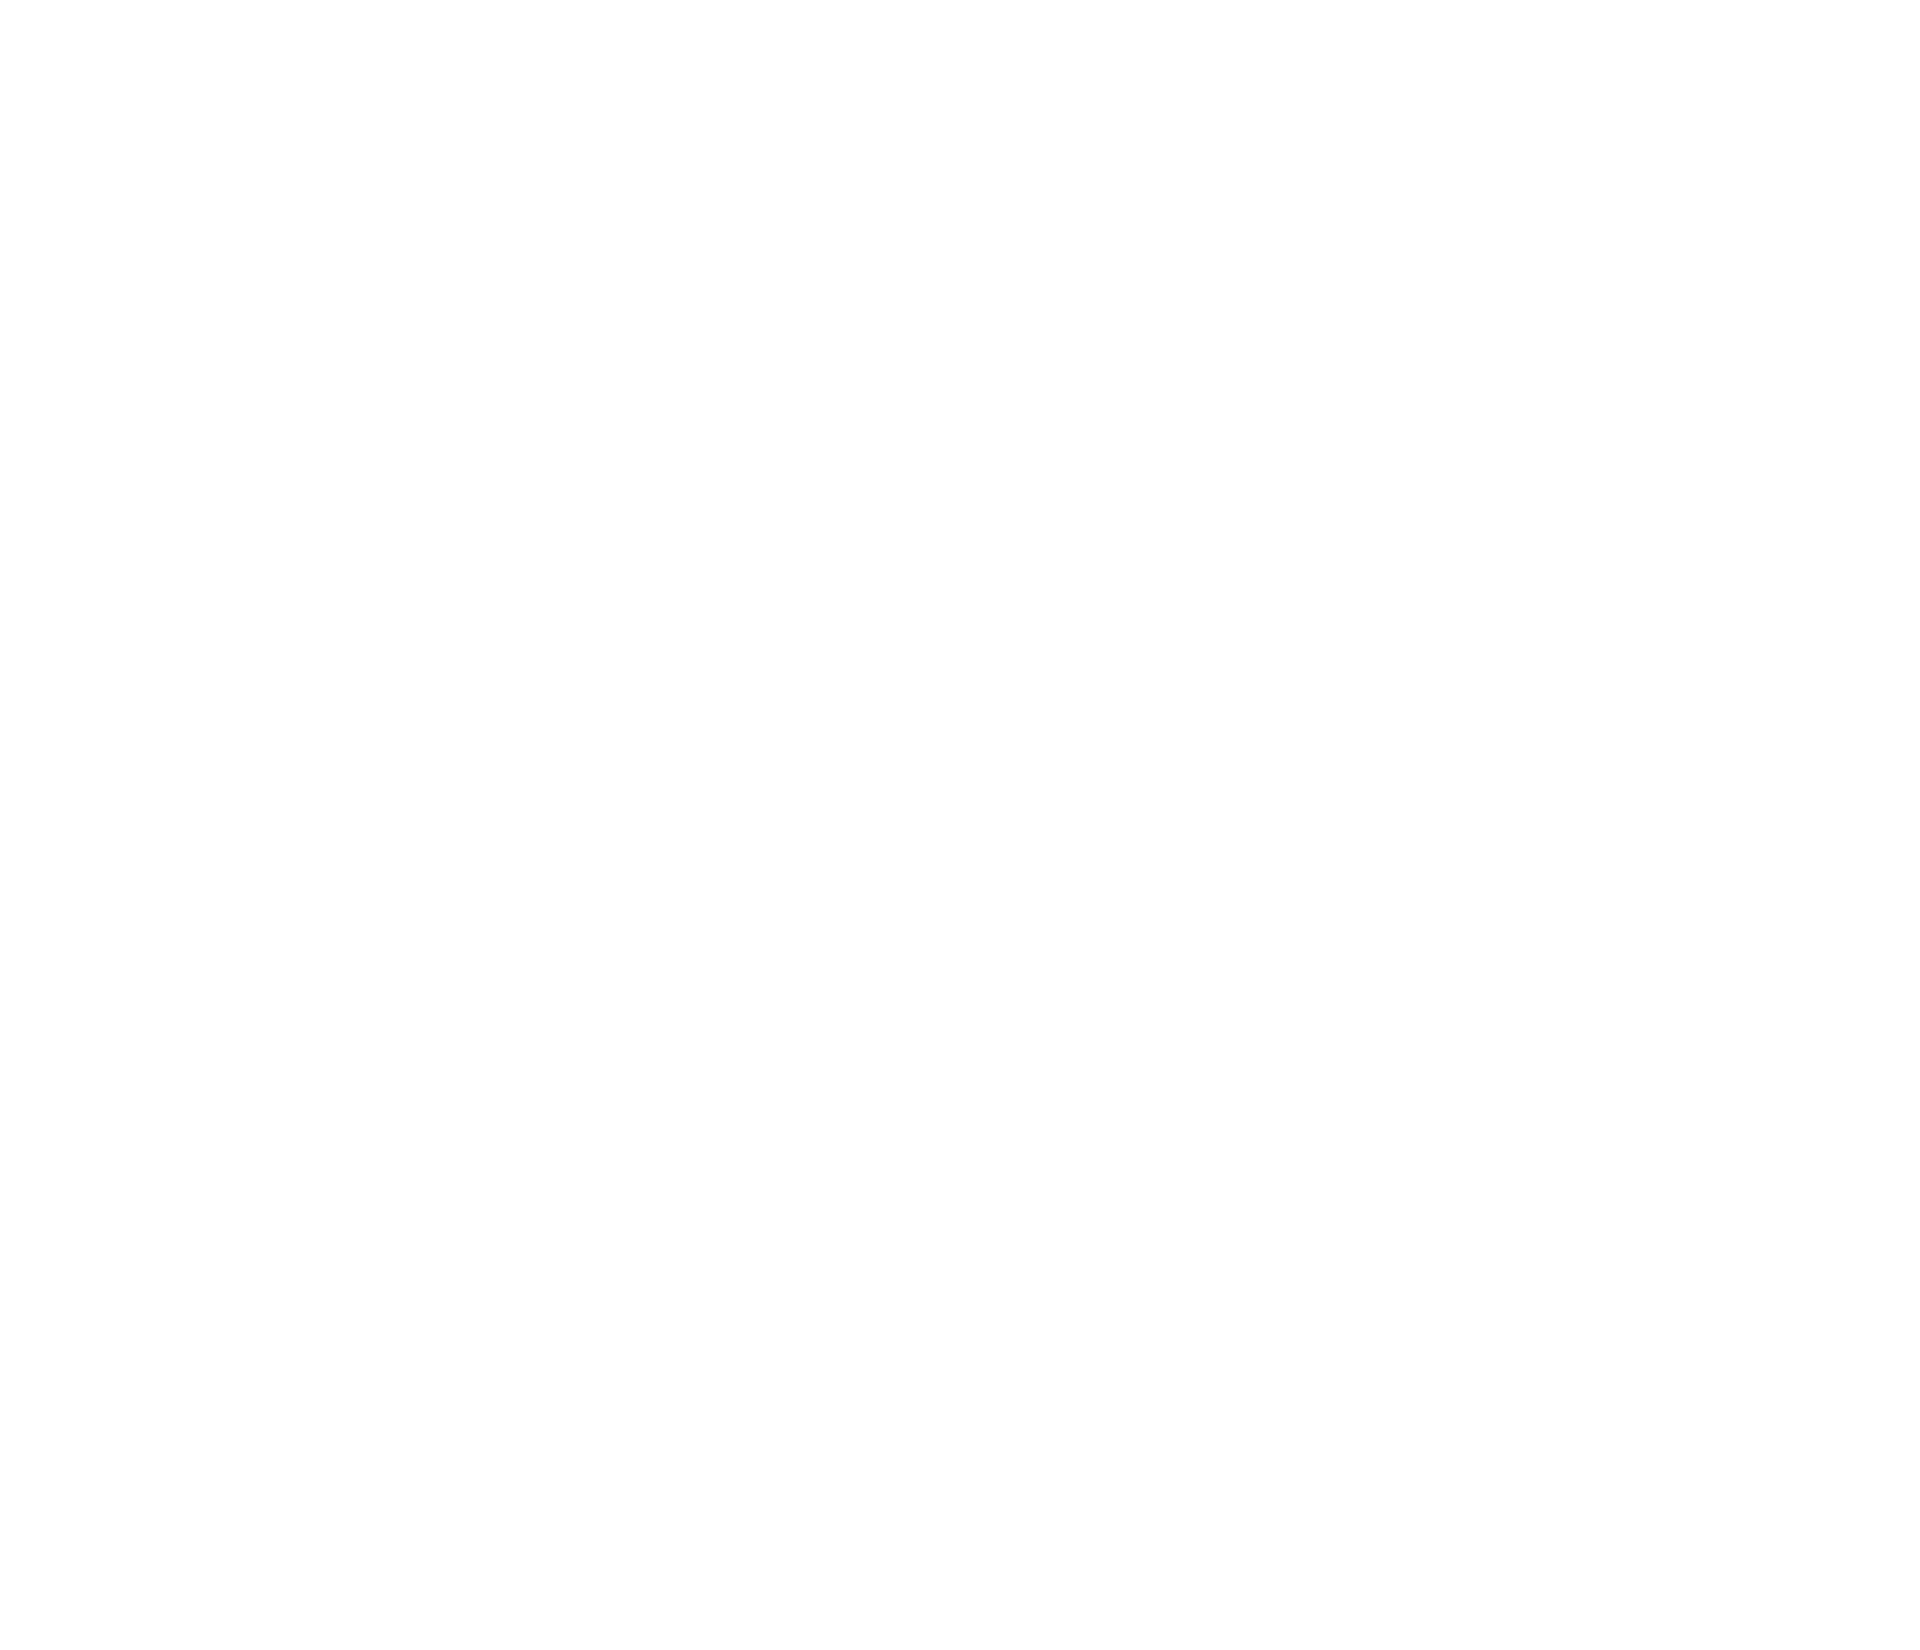 SFE's 
Guarantee: We stand behind our pledge to increase K-12 program participation and revenues because we have learned our fresh-from-scratch approach to fueling healthy, happy students also consistently fuels program financial success for your district. 